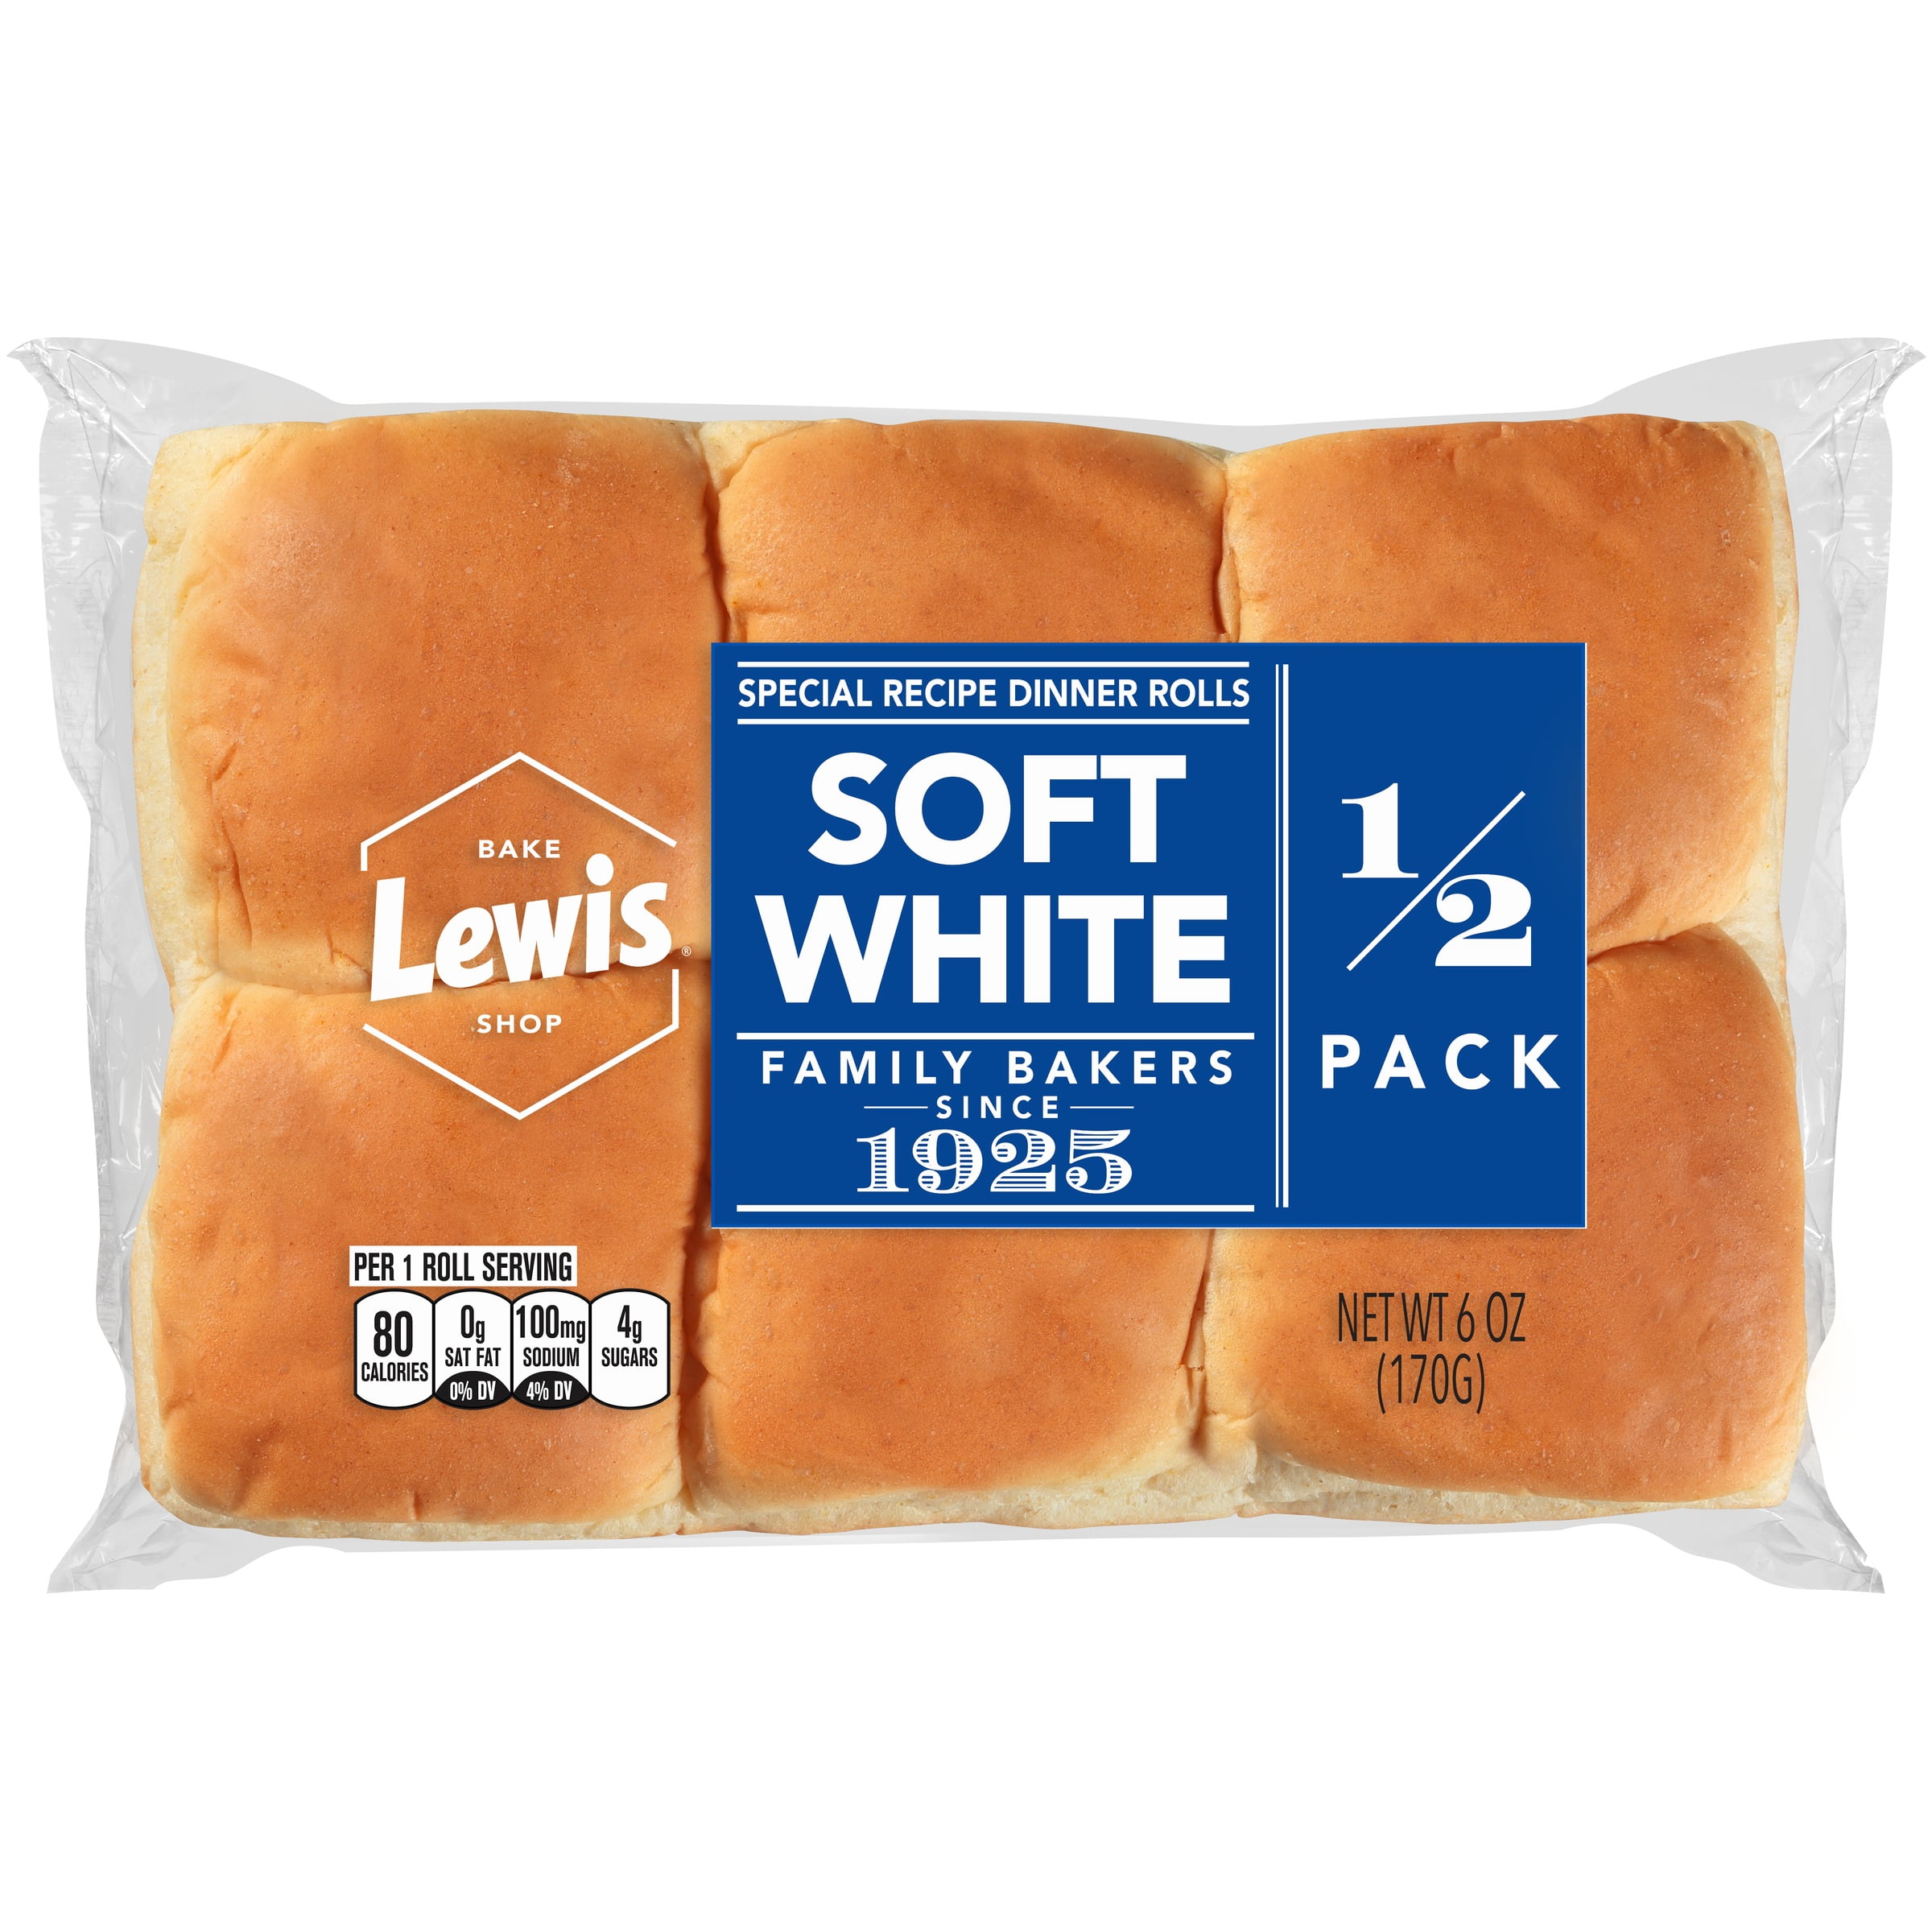 Lewis Bake Shop Special Recipe 1 2 Pack Soft White Dinner Rolls 6